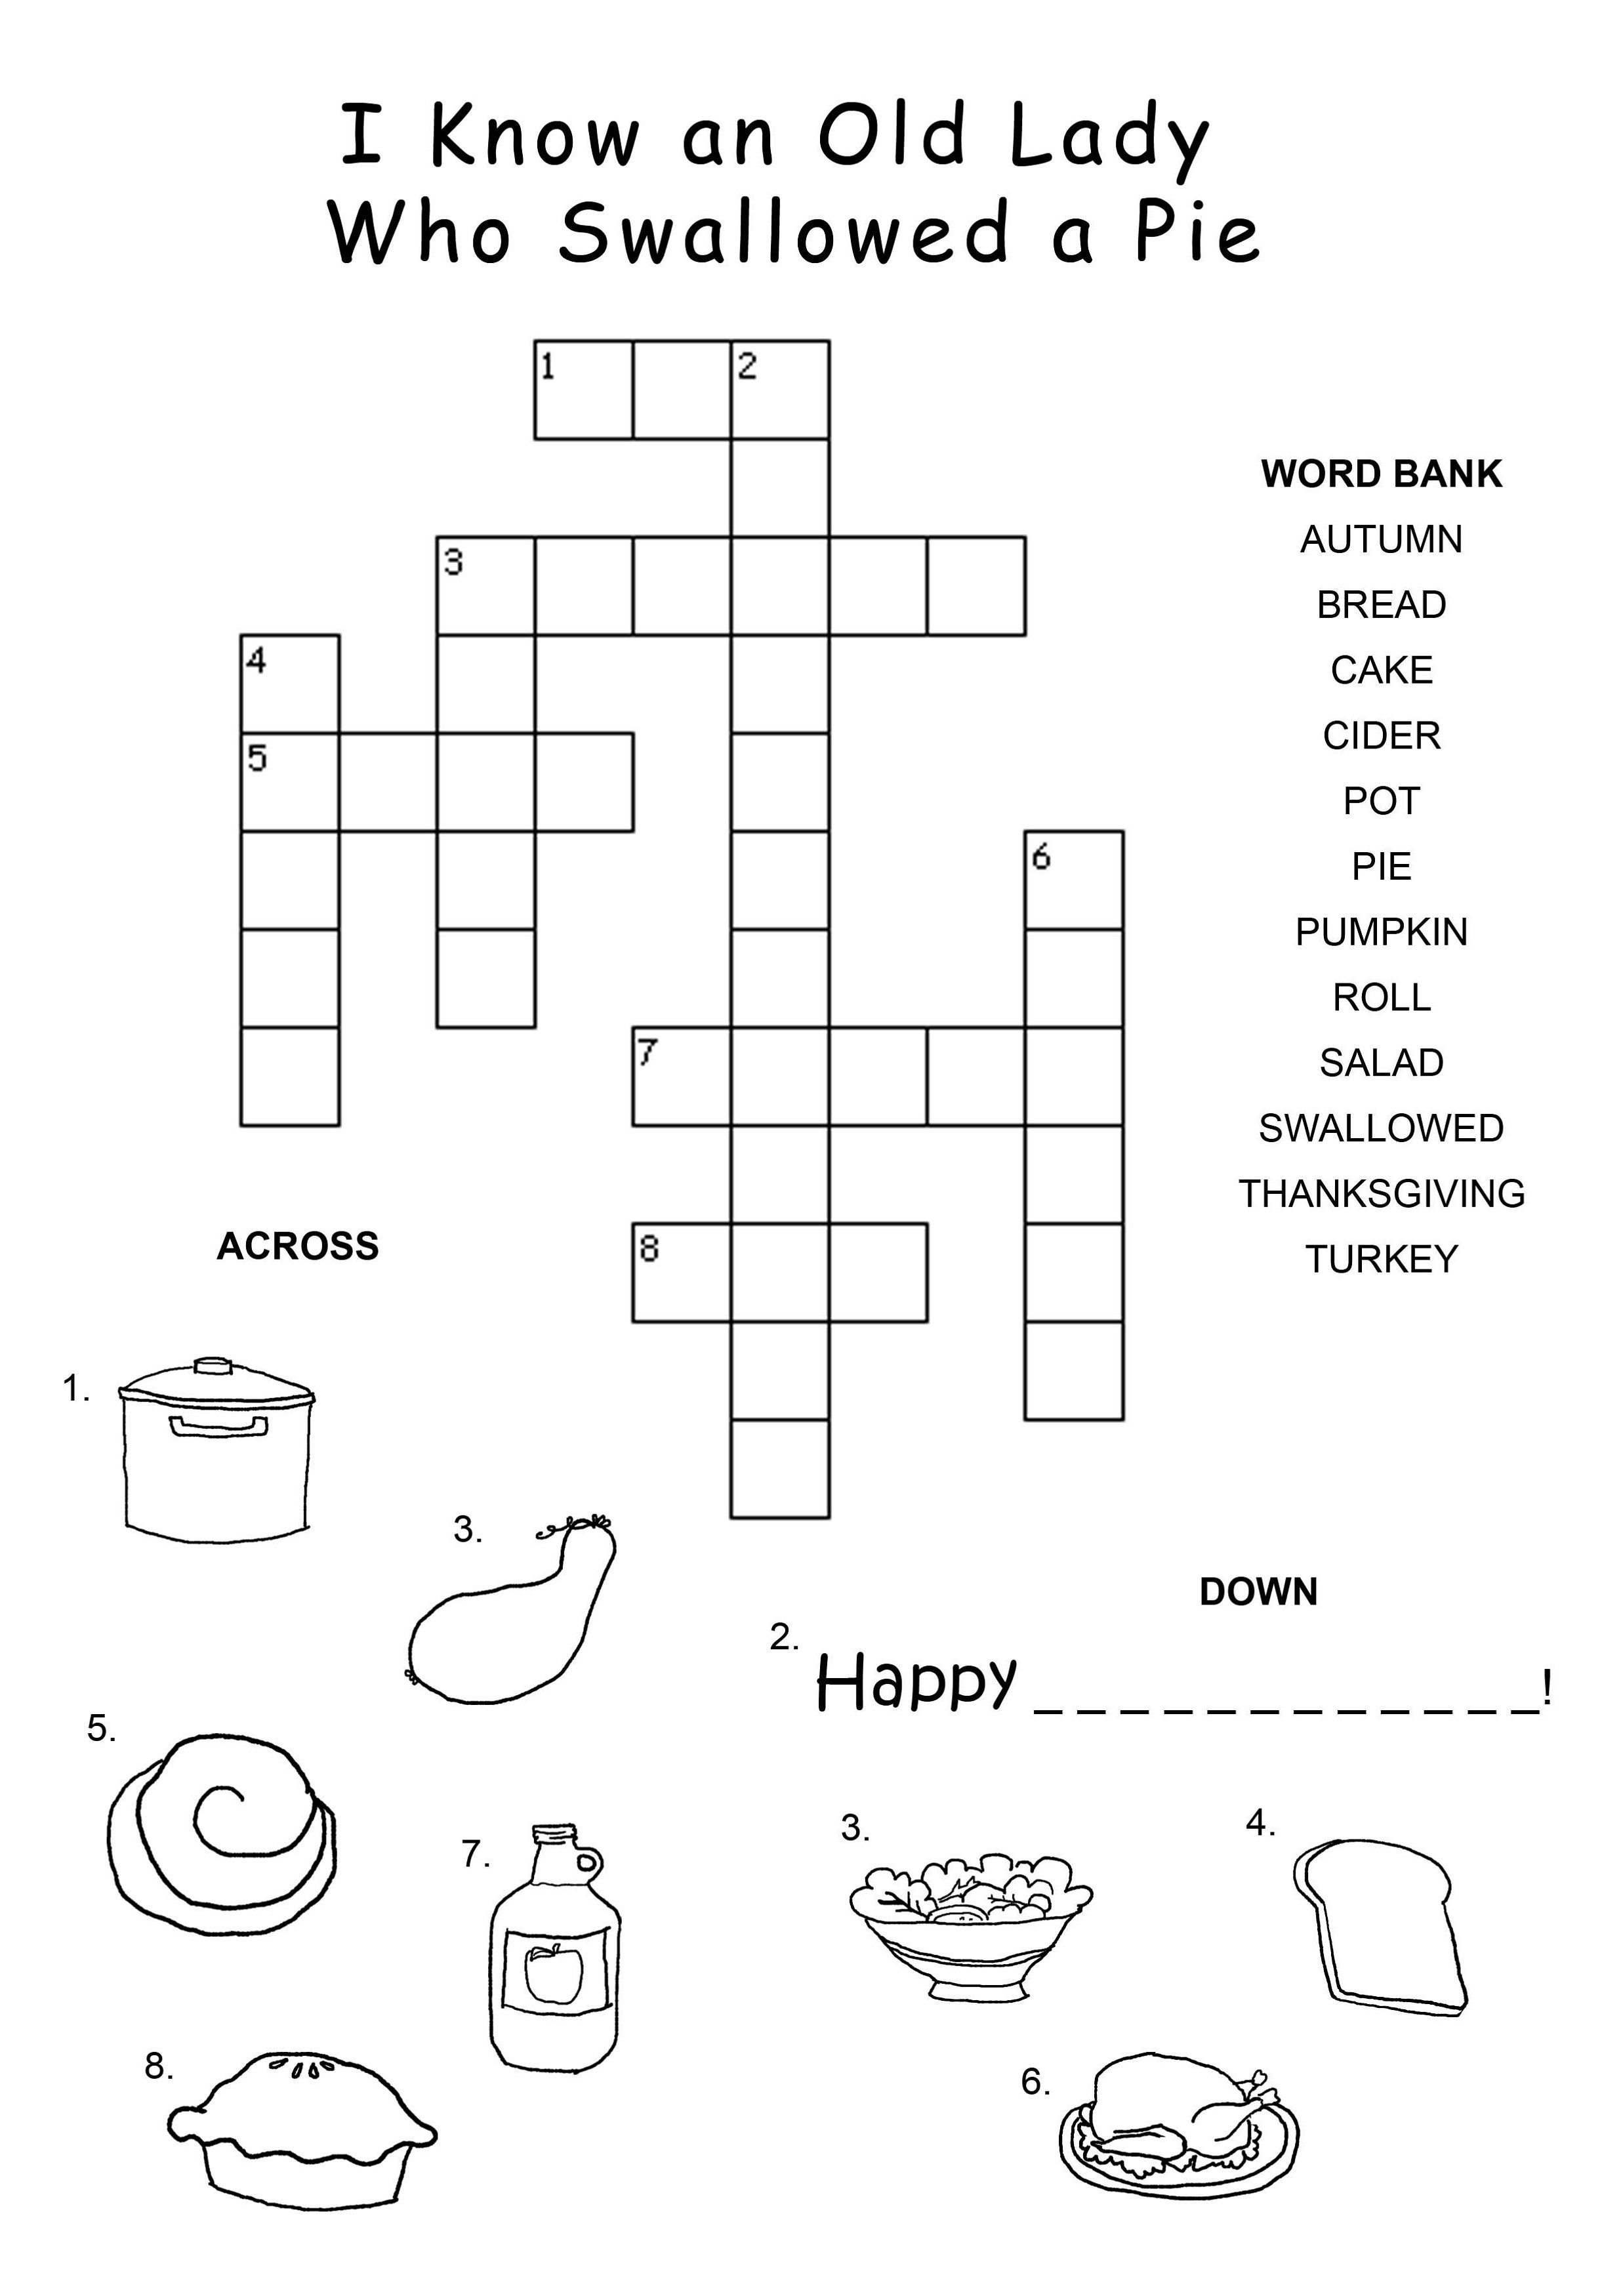 Crossword Puzzles For Kids - Best Coloring Pages For Kids - Printable Crossword Puzzles For Middle Schoolers